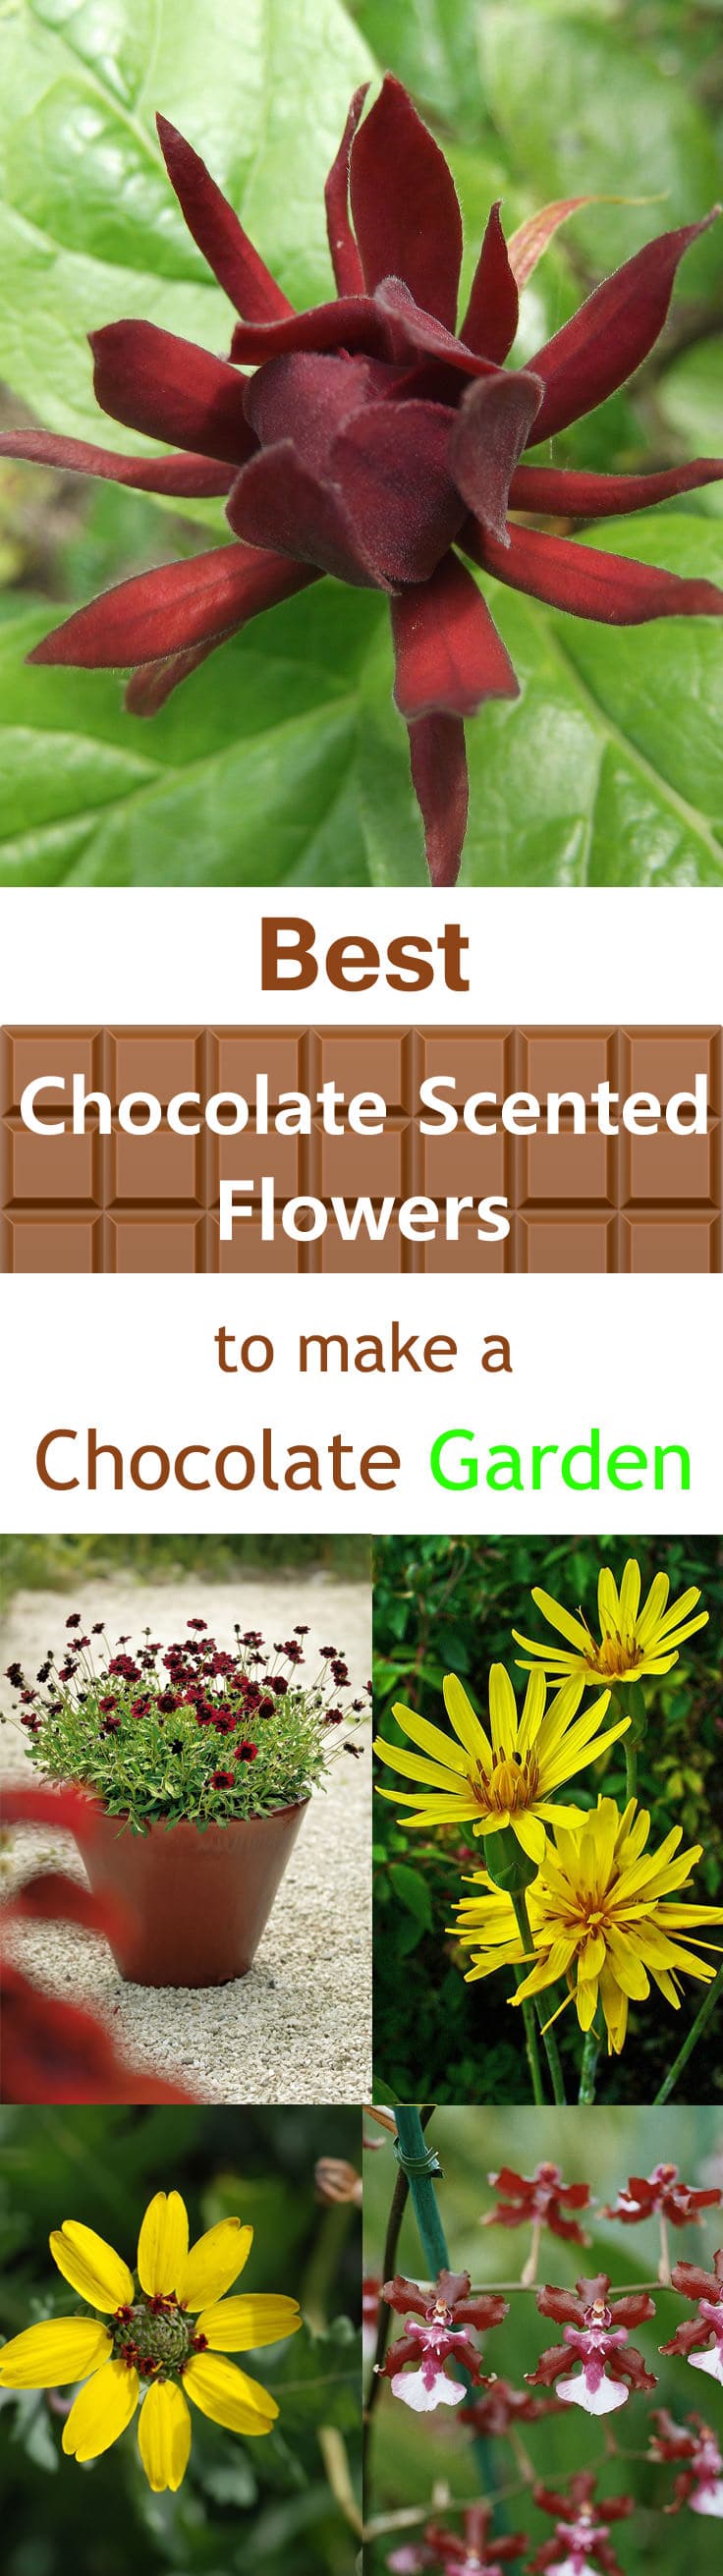 If you love chocolates grow chocolate scented flowers, check out this list of plants and flowers to get an idea.